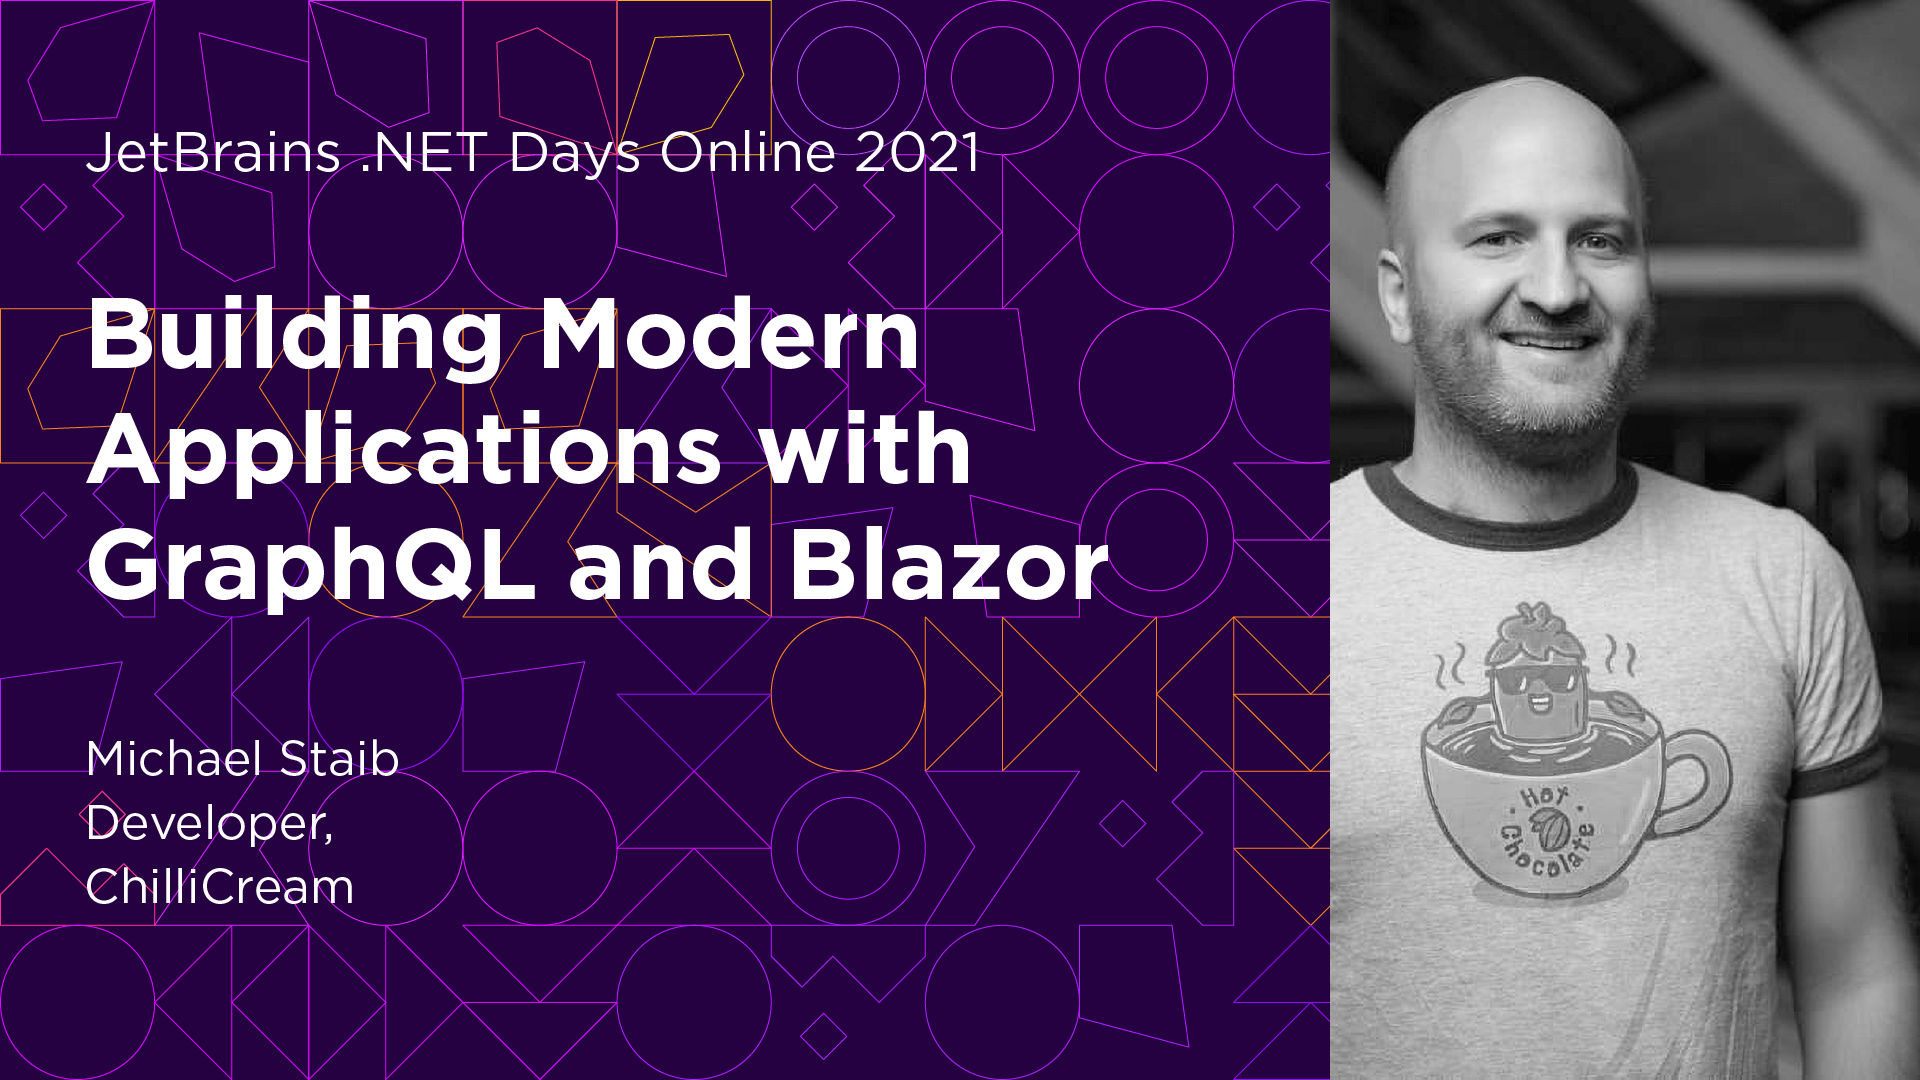 Building Modern Applications with GraphQL and Blazor